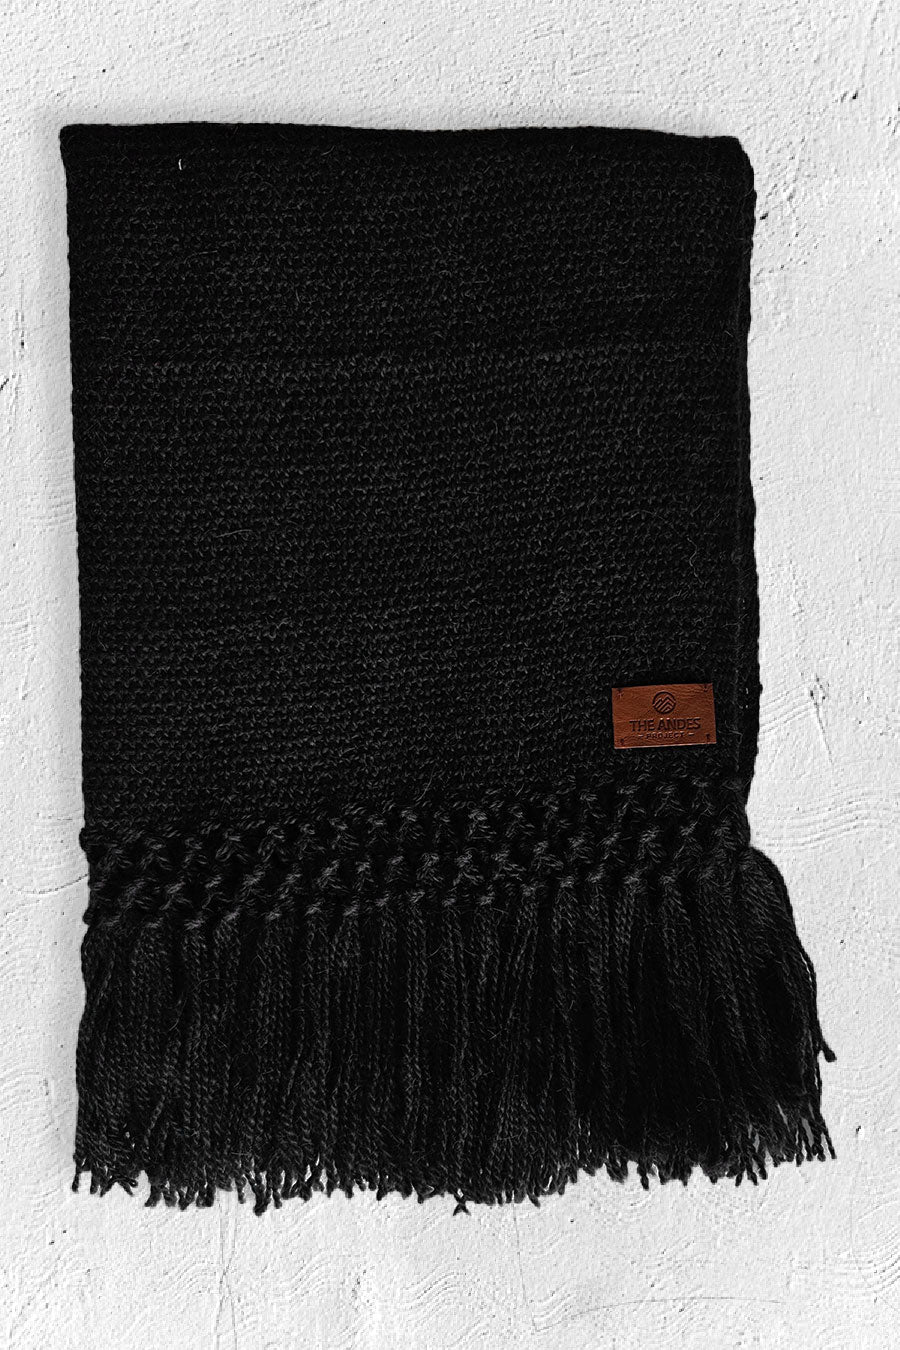 PUNA LLAMA THROW - SMALL | BLACK COLOUR-The Andes Project